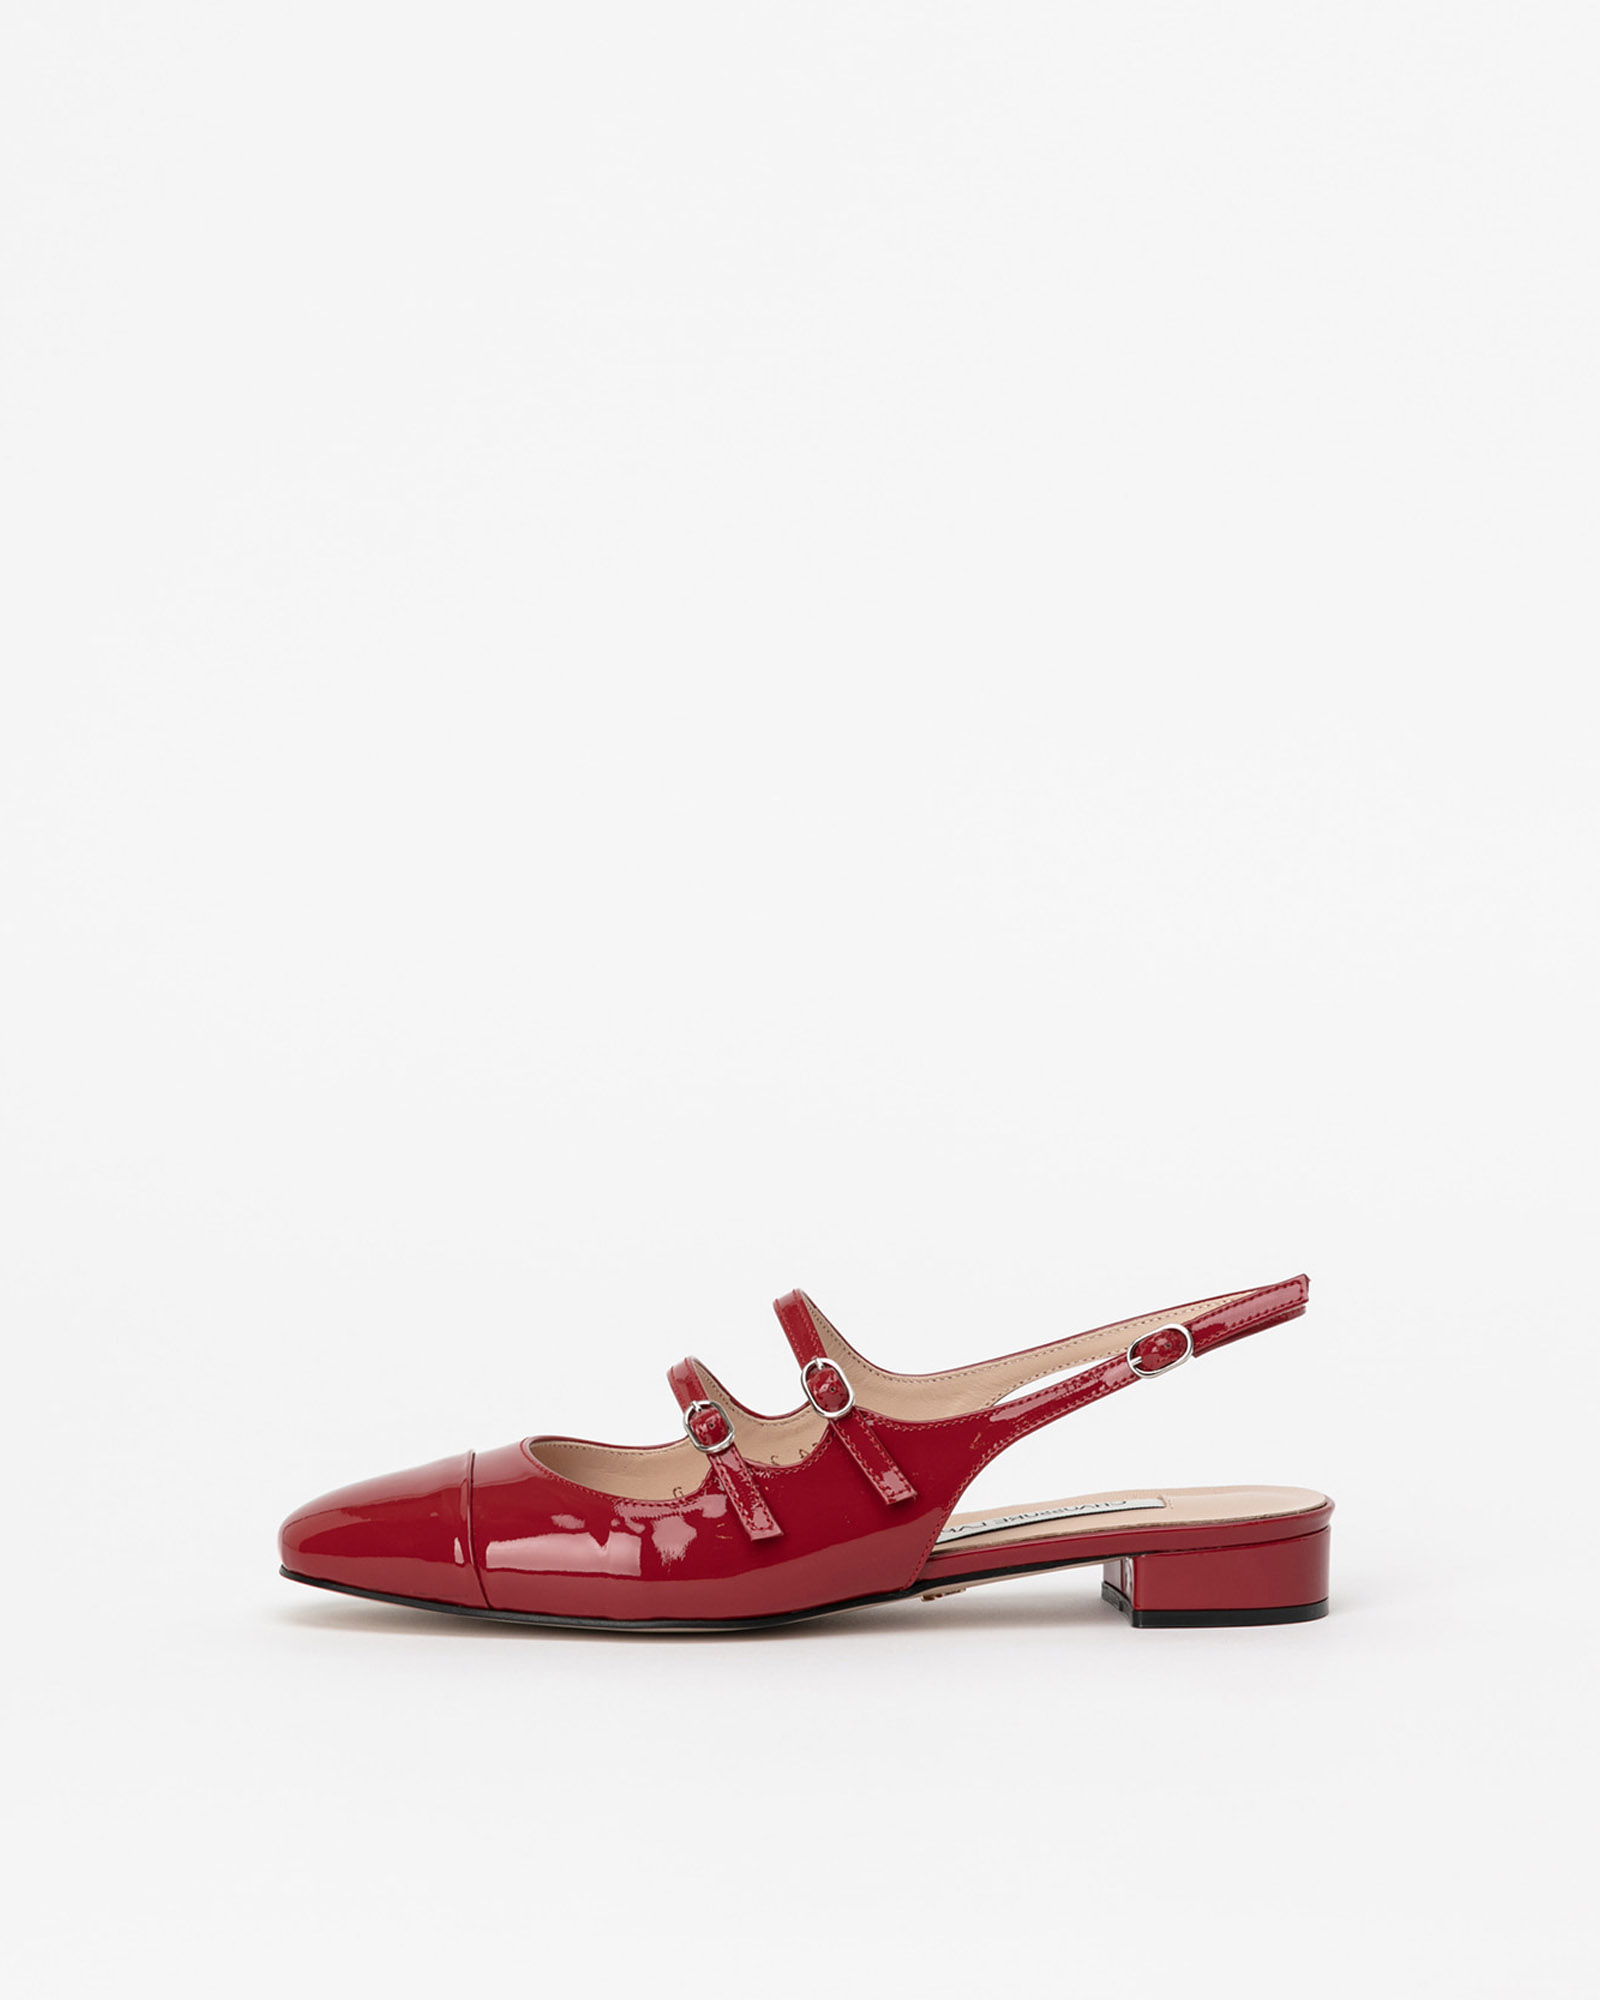 Crescin Maryjane Slingback Flat shoes in Red Patent